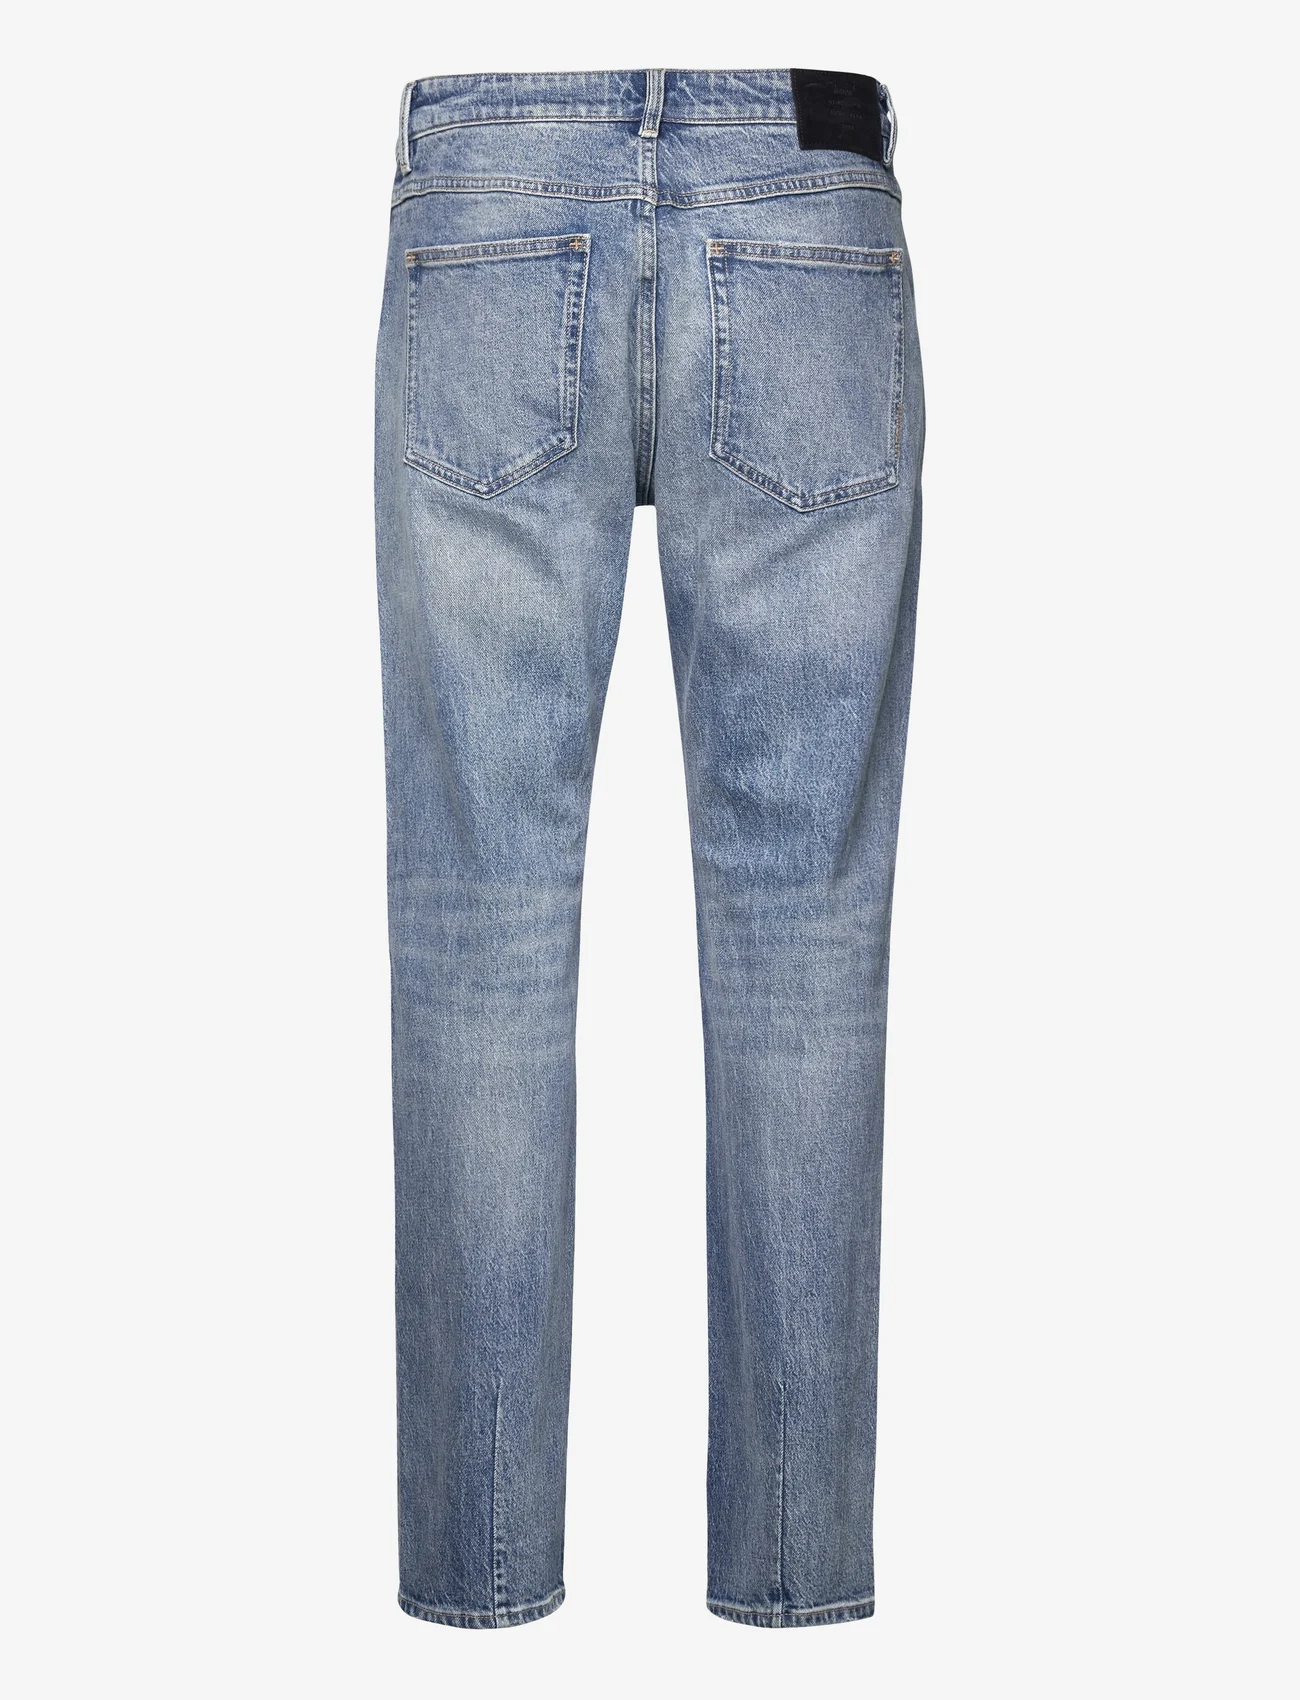 NEUW - RAY STRAIGHT DECADE - tapered jeans - organic vintage blue - 1